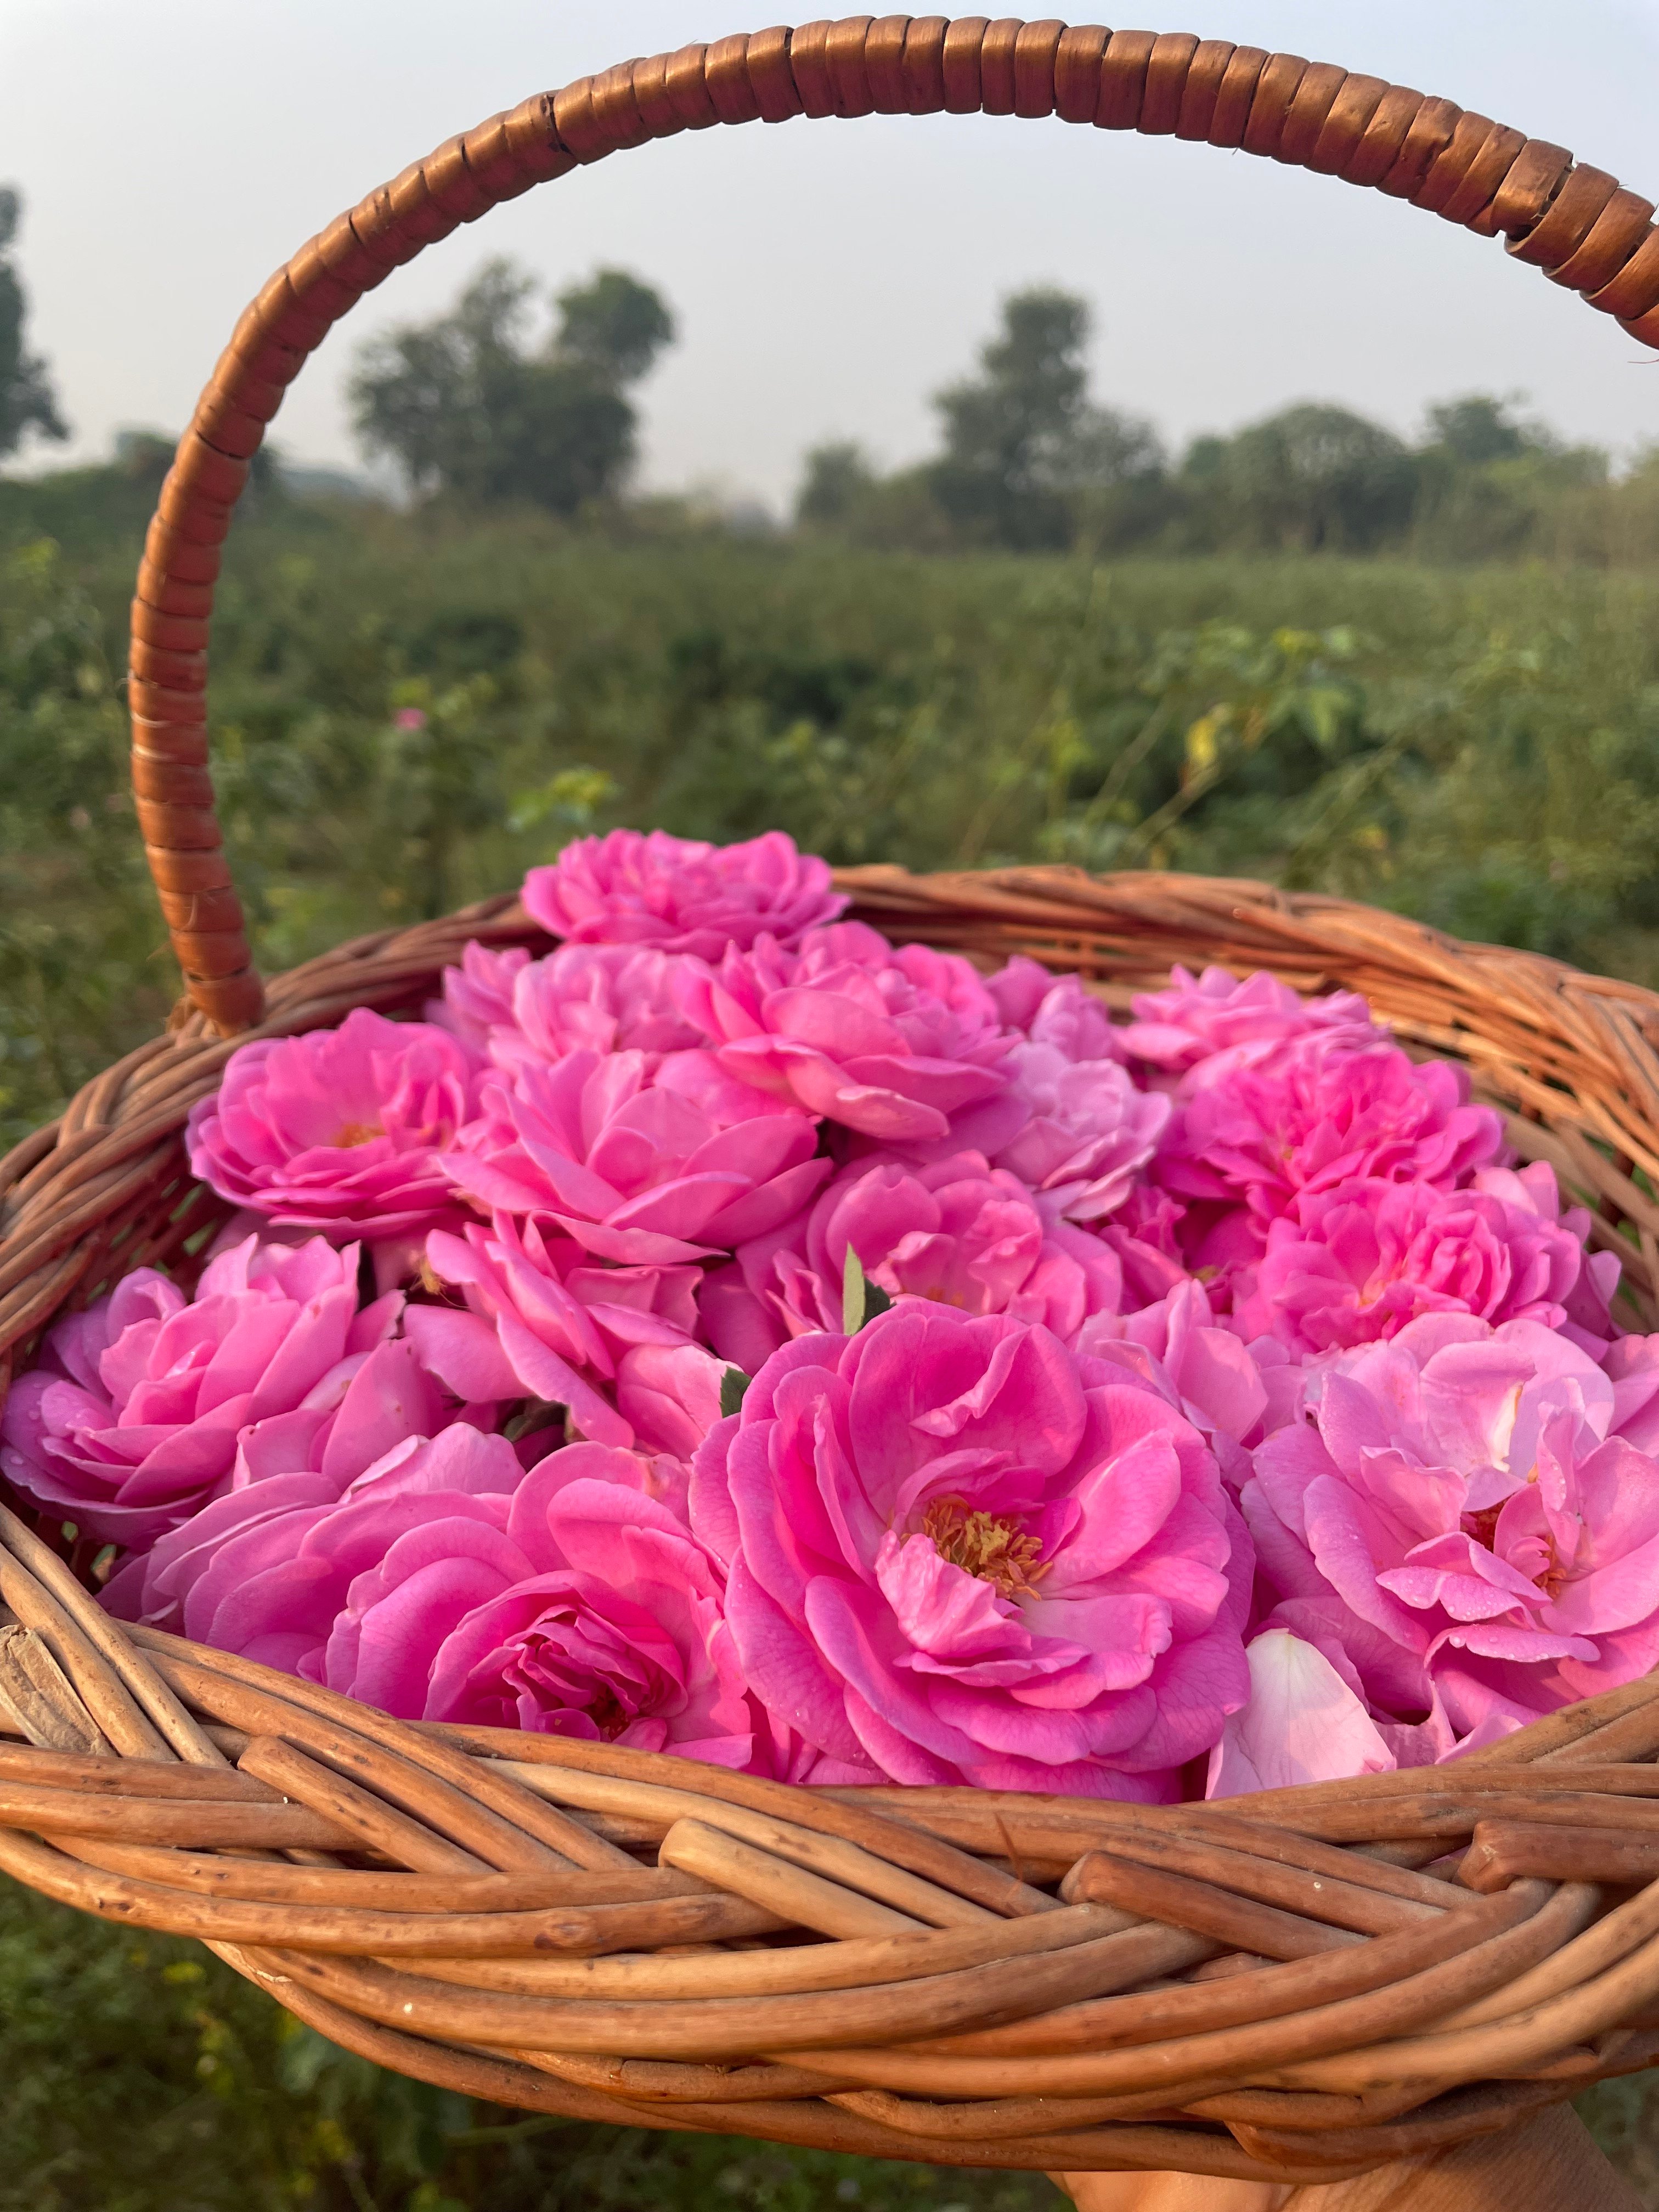 Flower petals are distilled the same day they’re picked. Photo: Reem Khokhar 